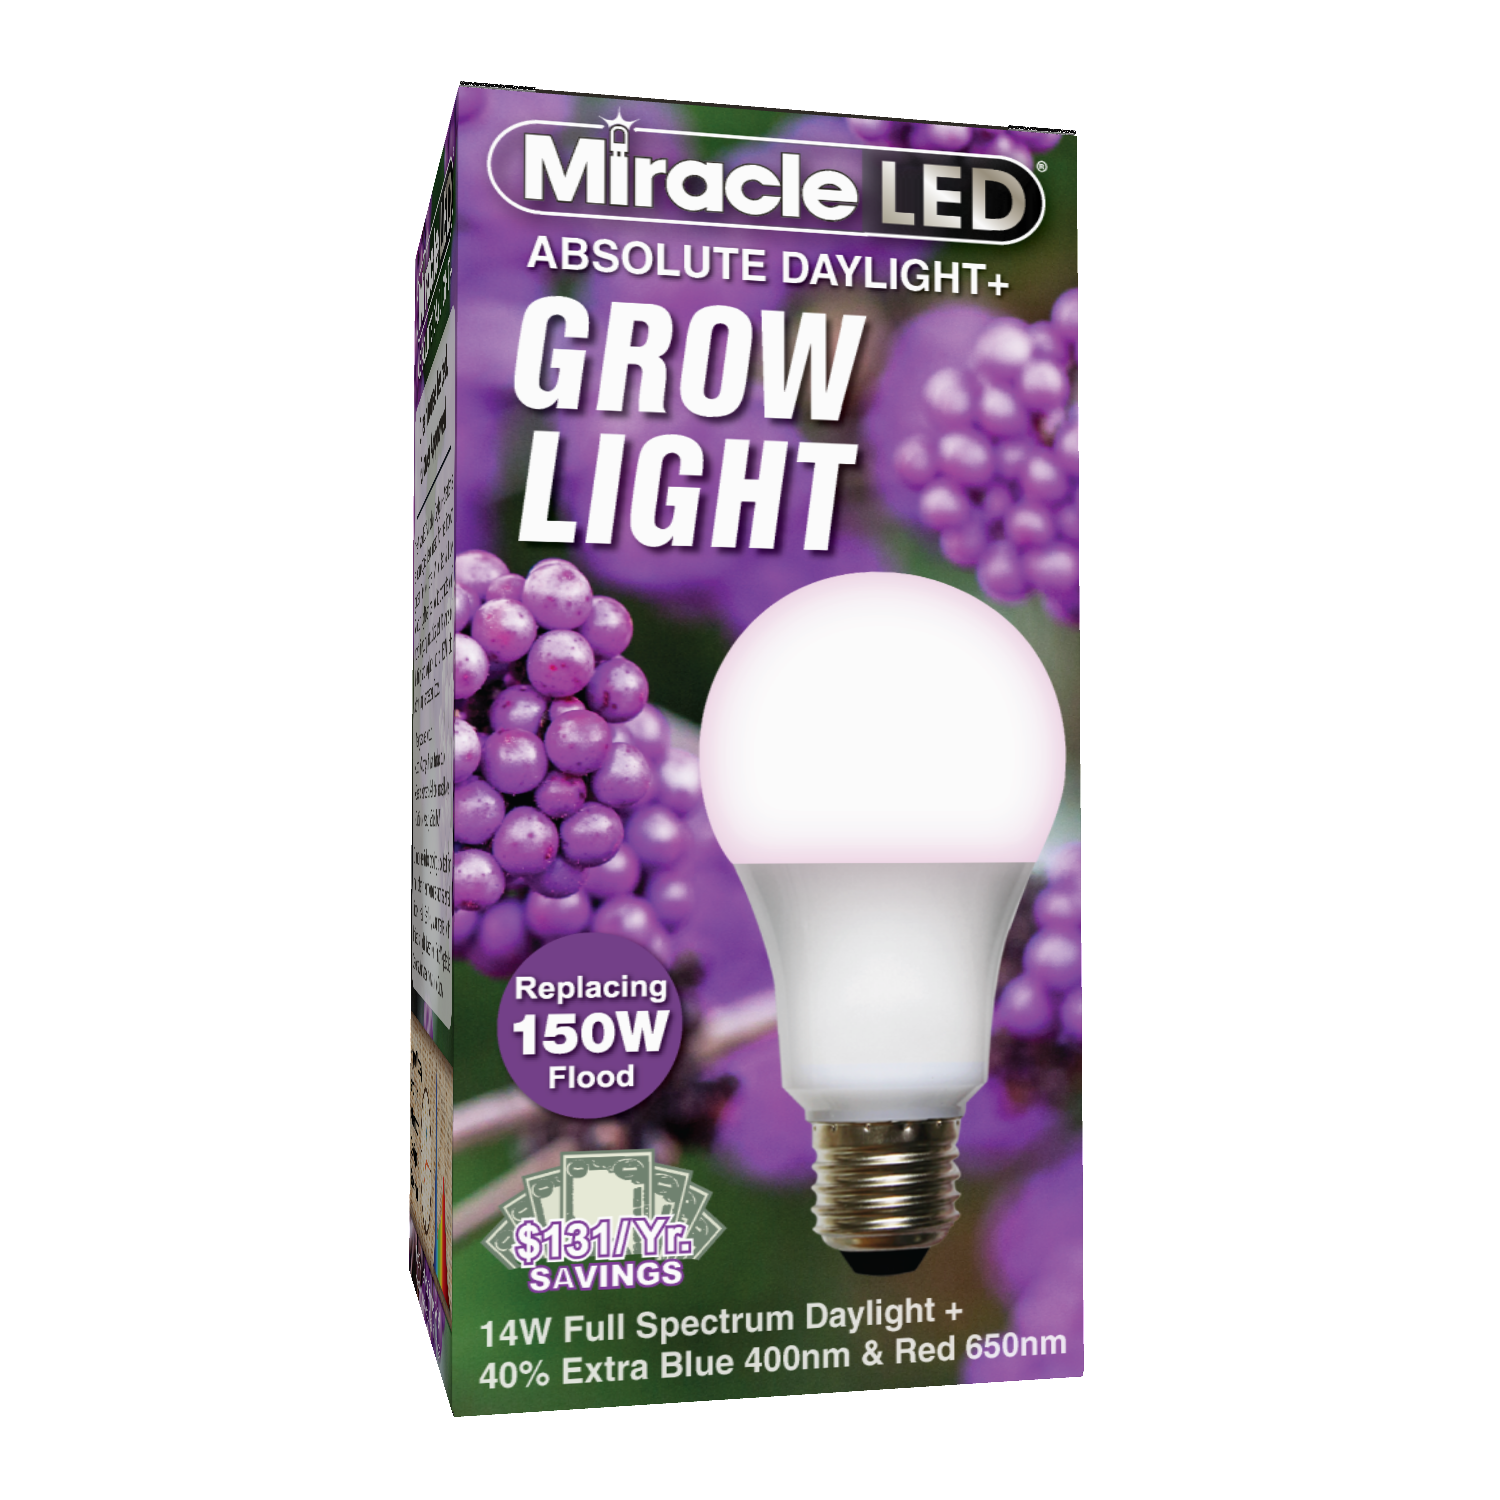 6-Pack MiracleLED 604527 Full Spectrum Replacing 150W Grow Light